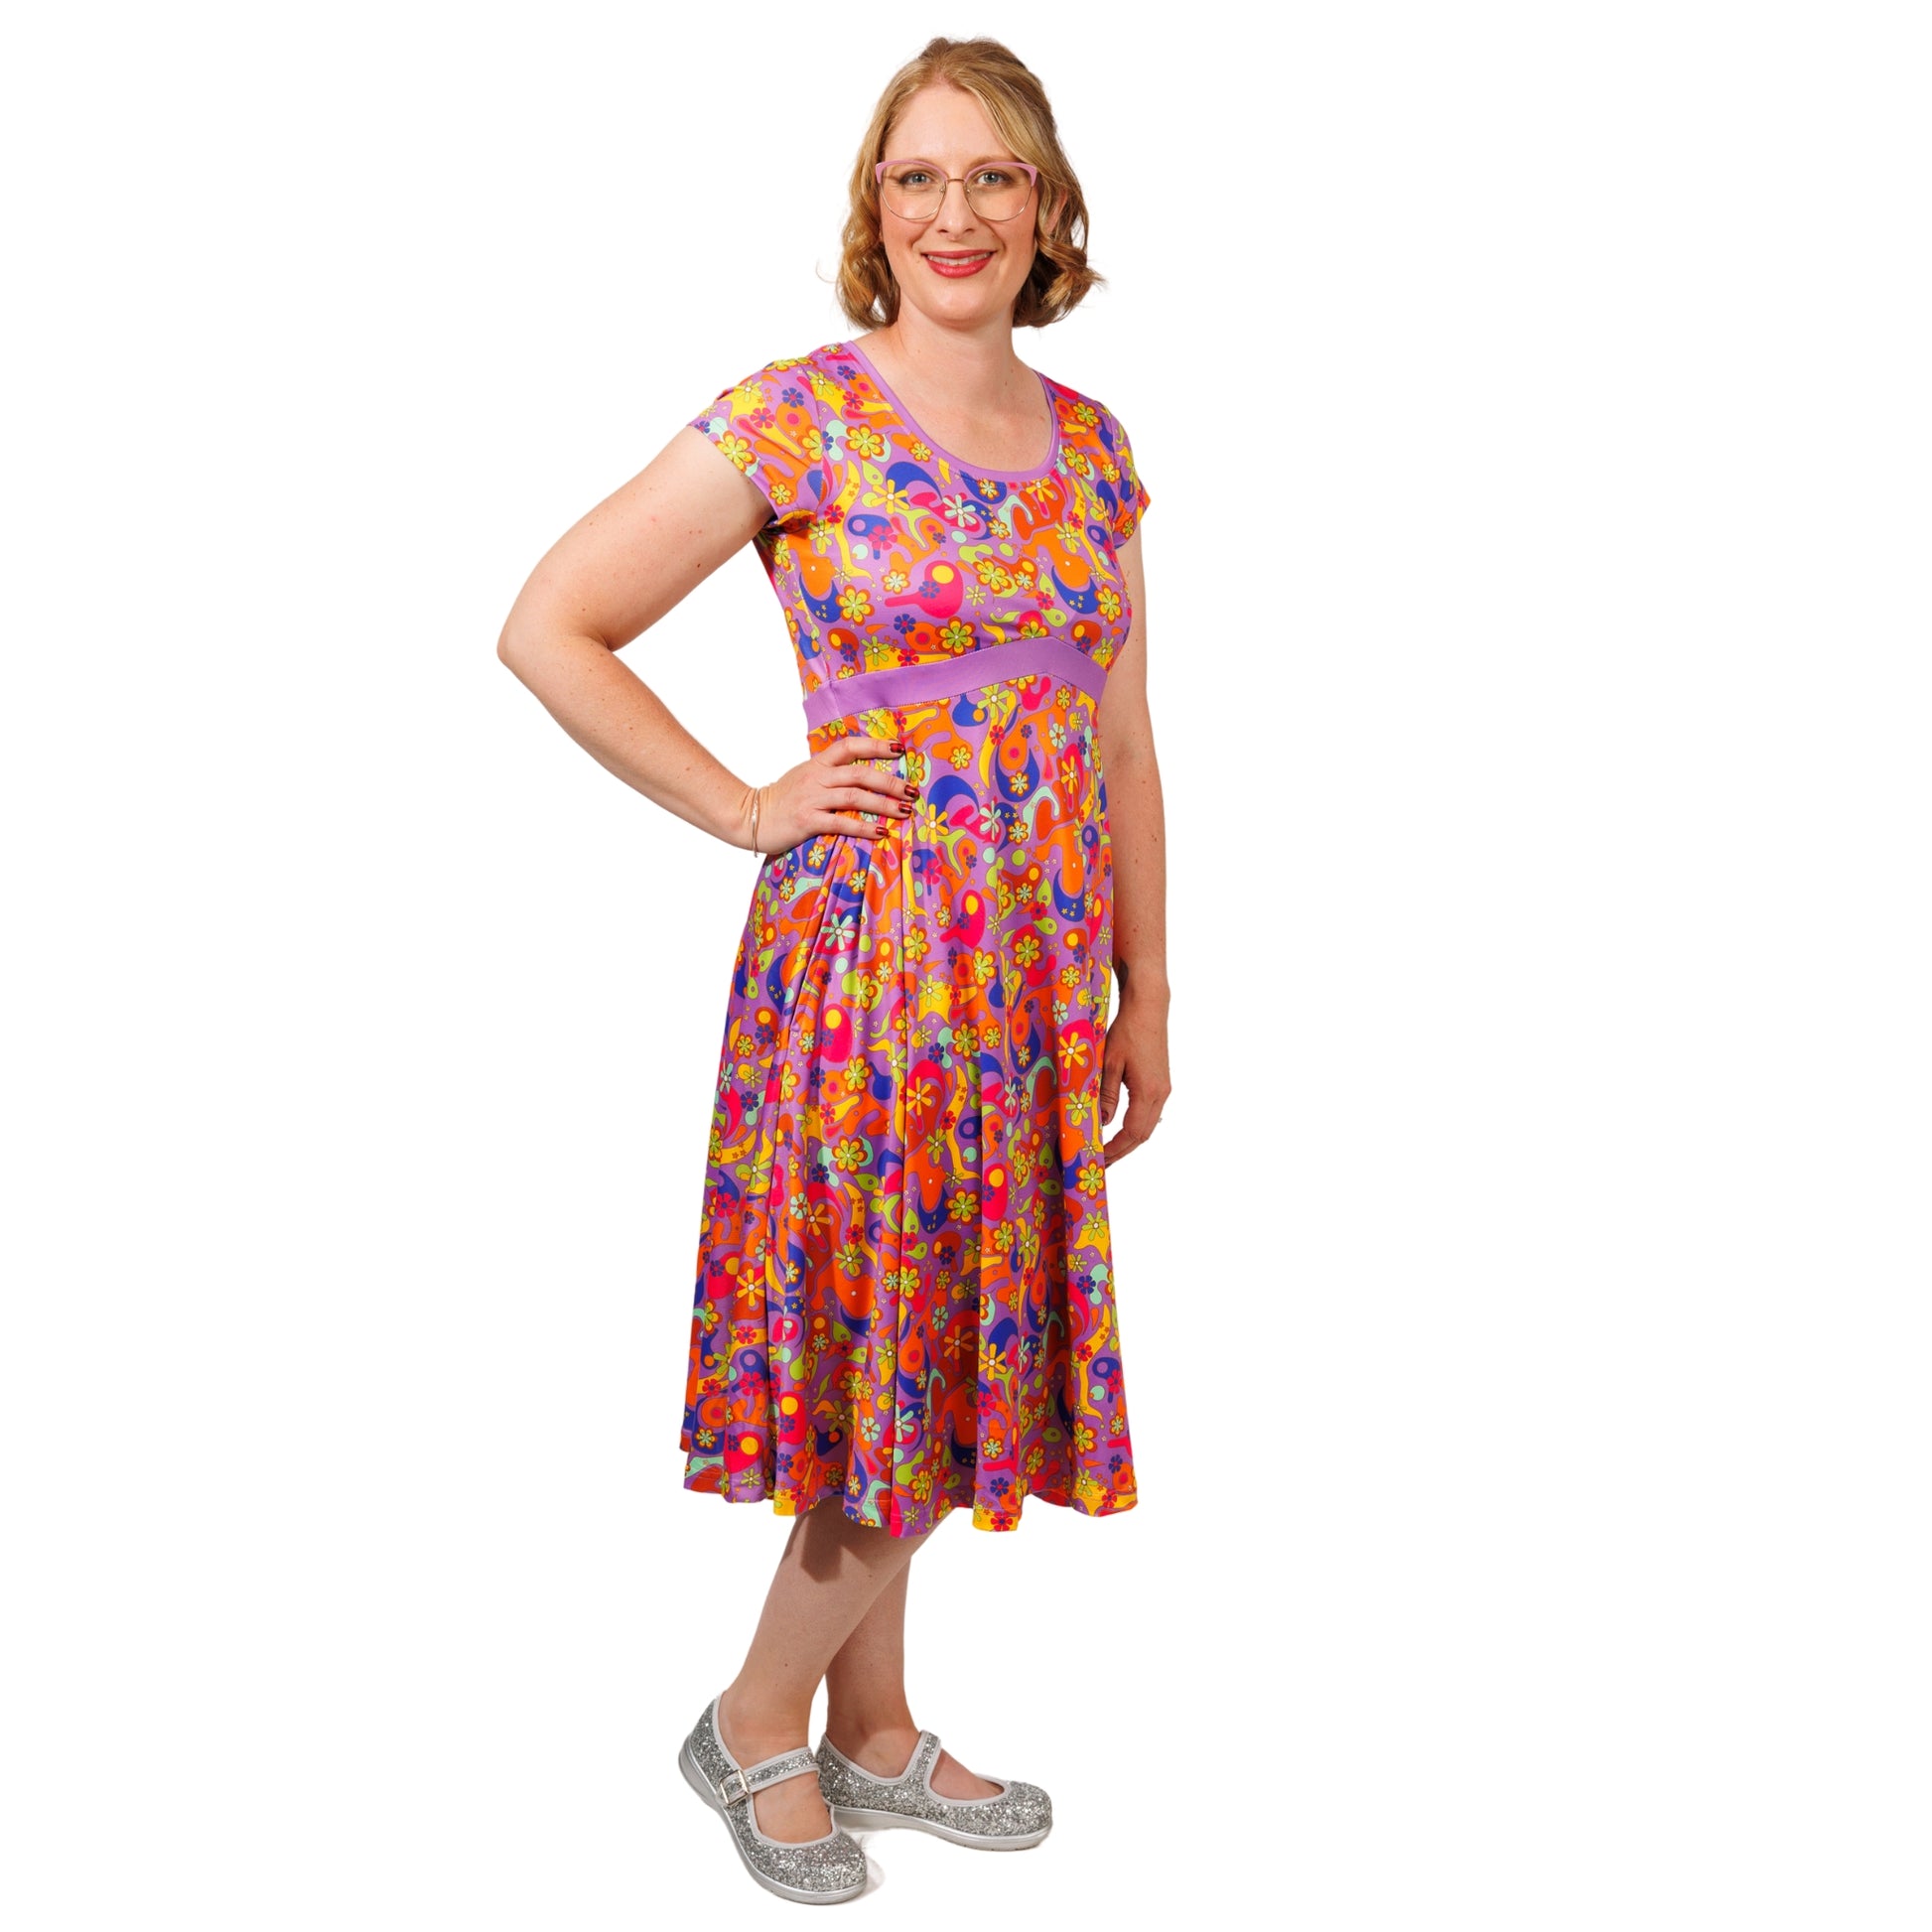 Flower Power Tea Dress by RainbowsAndFairies.com.au (Floral Print - Woodstock - Psychedelic - Dress With Pockets - Retro - Circle Skirt - Rockabilly) - SKU: CL_TEADR_FLOPO_ORG - Pic-03